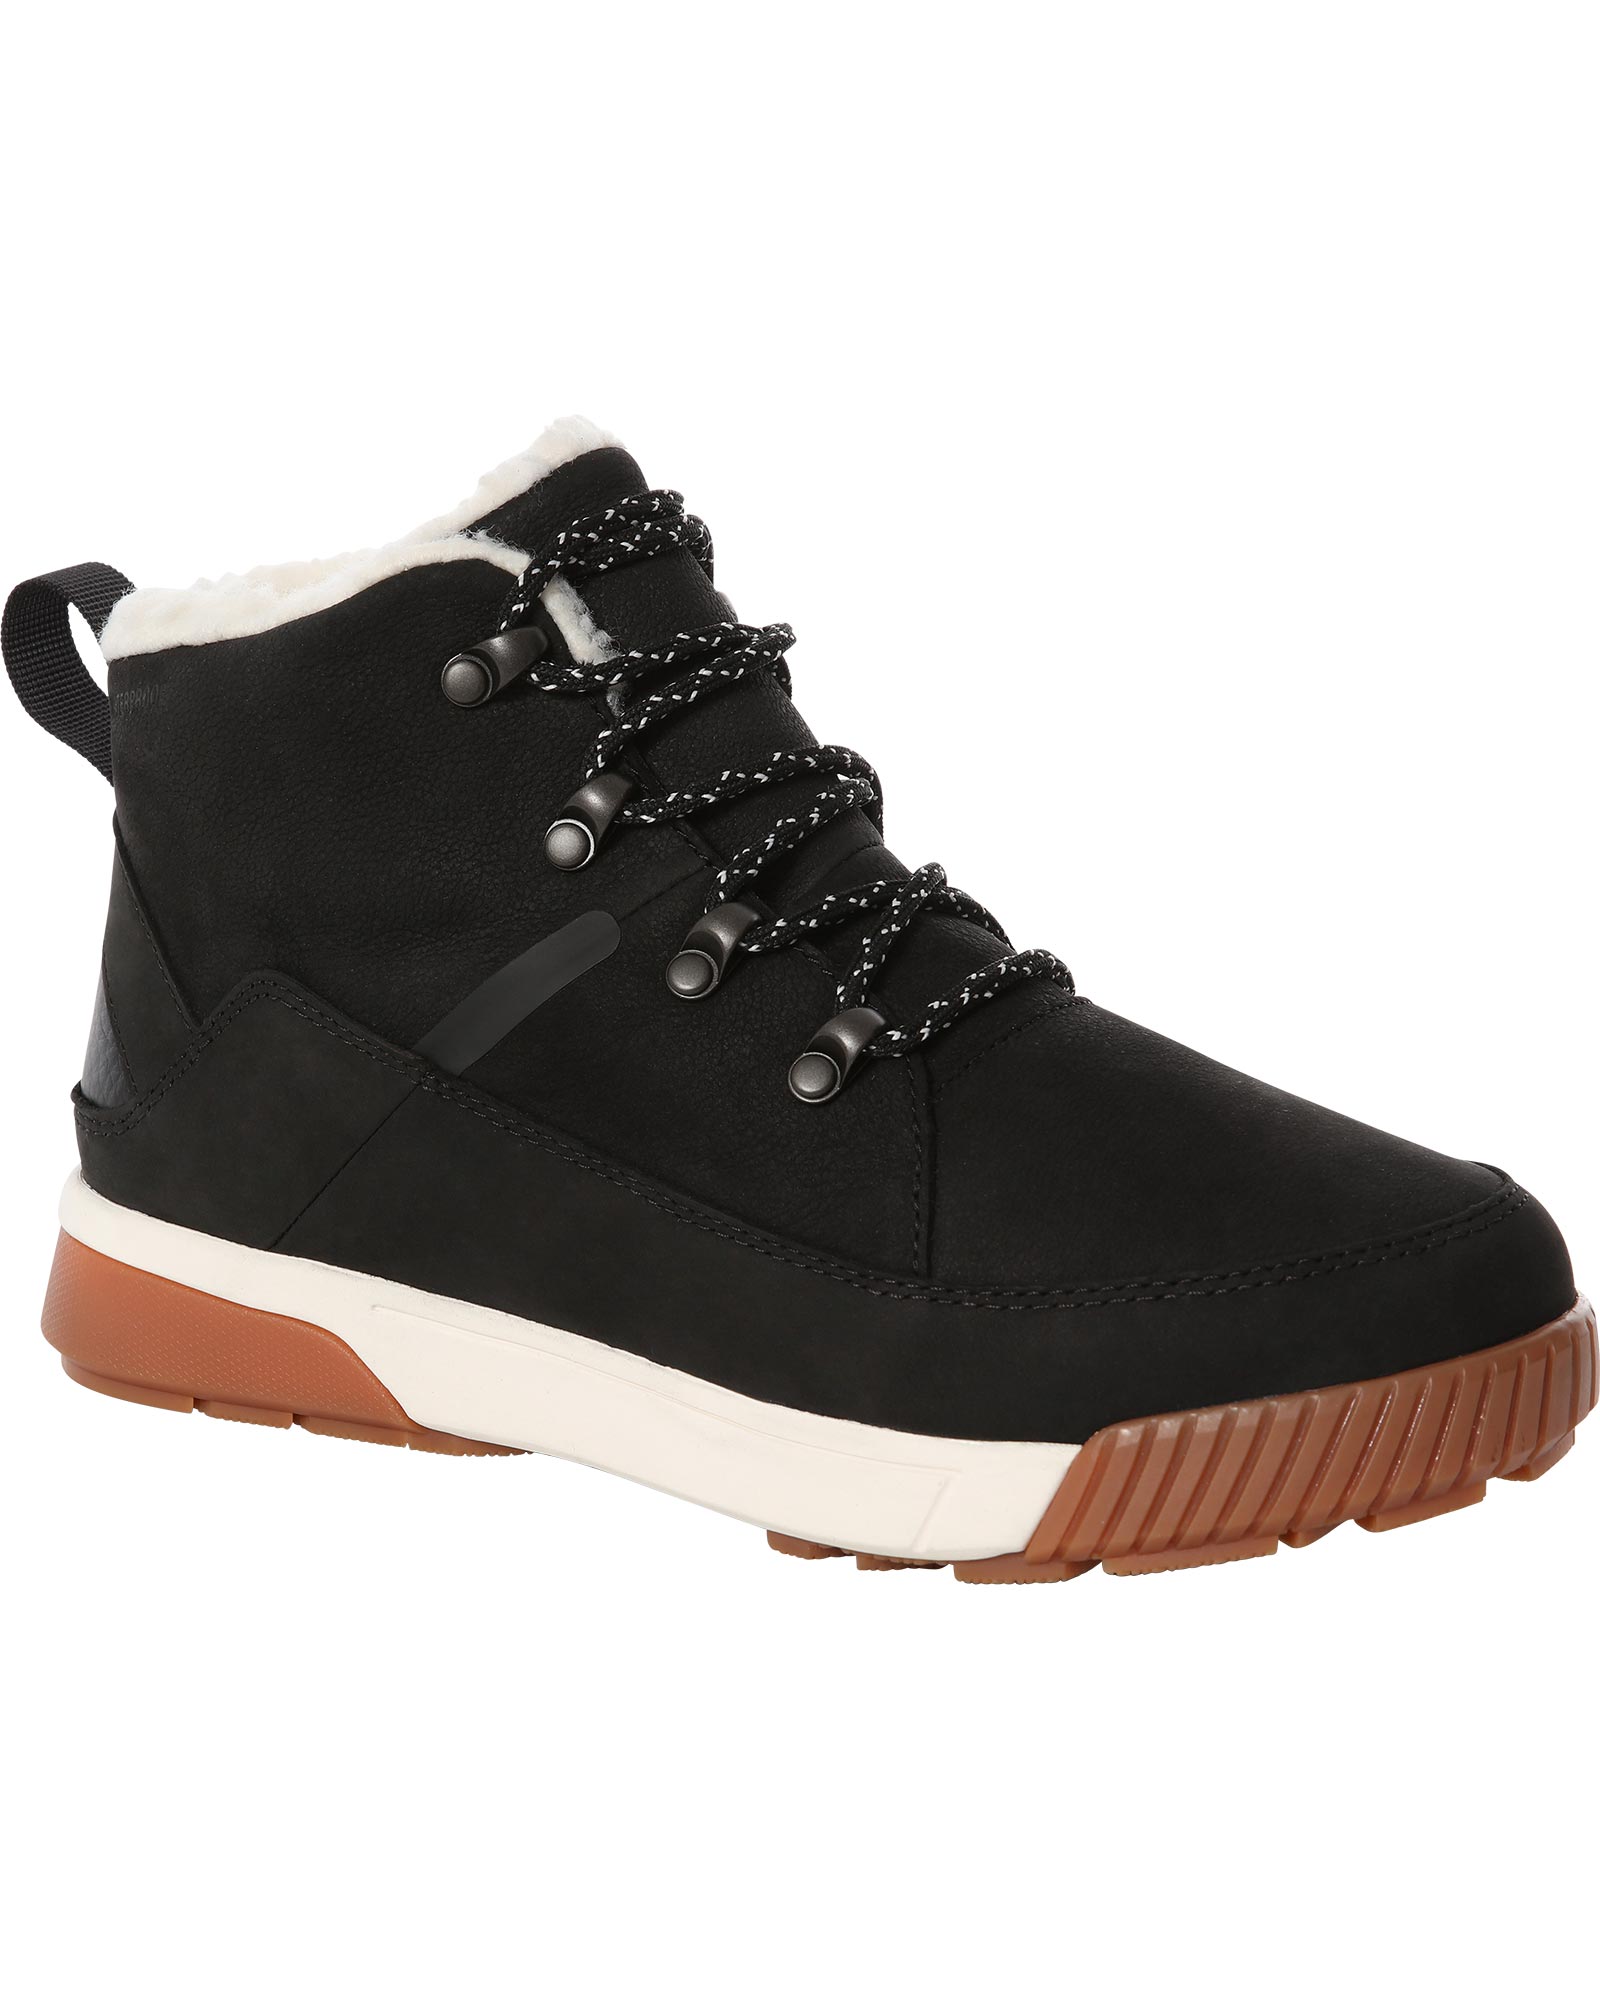 The North Face Sierra Womens Mid Lace Waterproof Boots